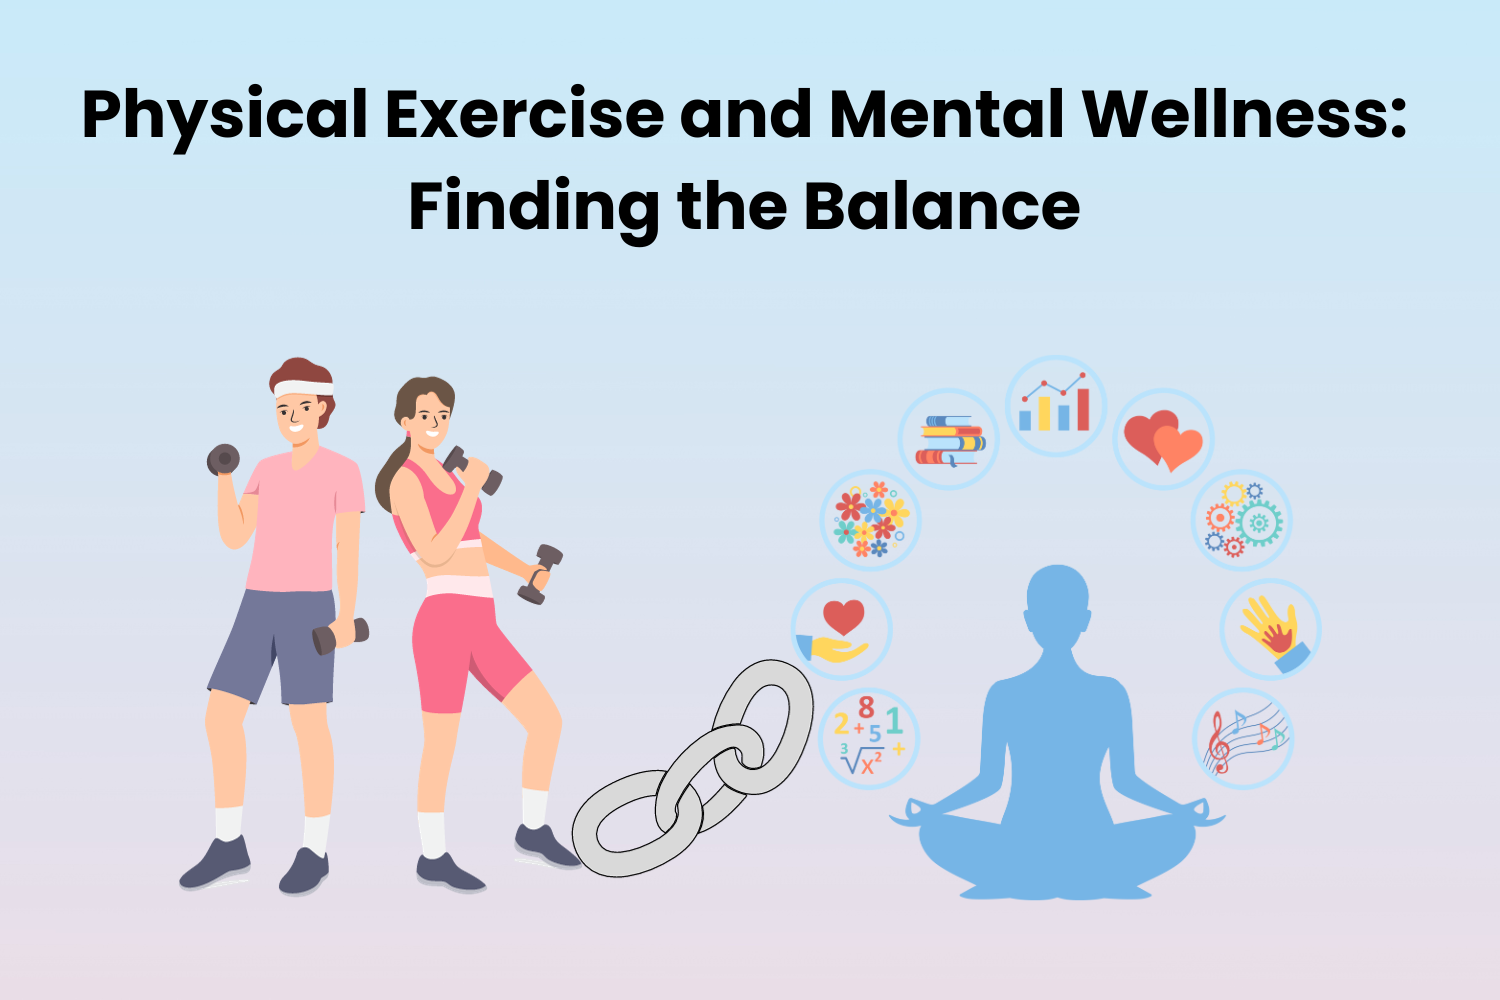 Physical Exercise and Mental Wellness: Finding the Balance